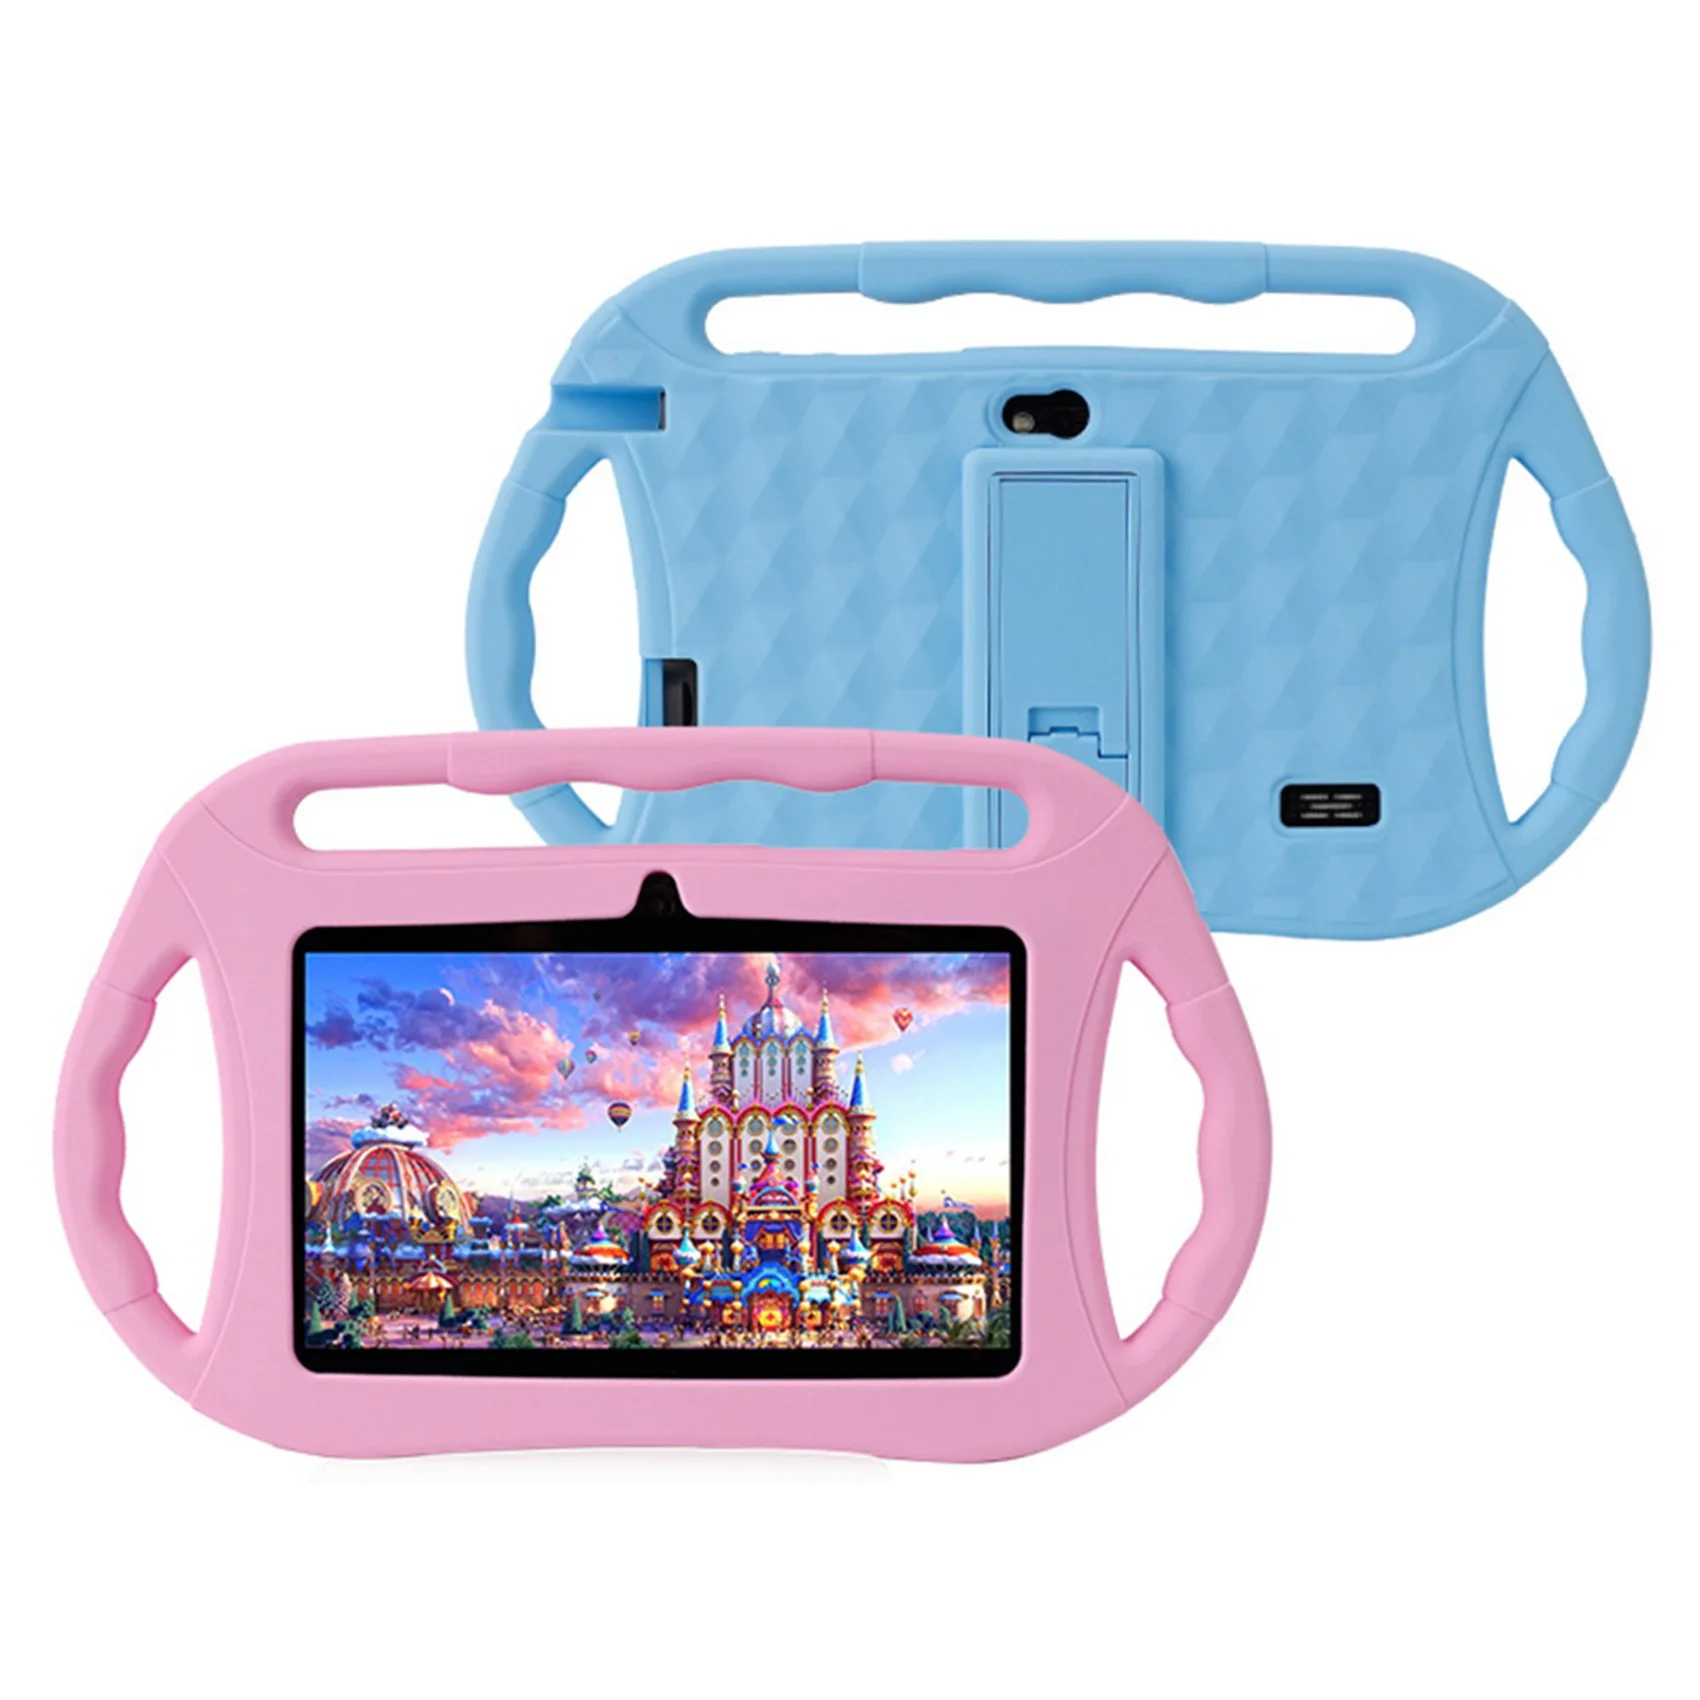 

7 Inch Kids Tablet Quad Core Dual Camera Tablet 1GB+16GB Android10.0 Childrens Tablet Learning Tablets Pink US Plug